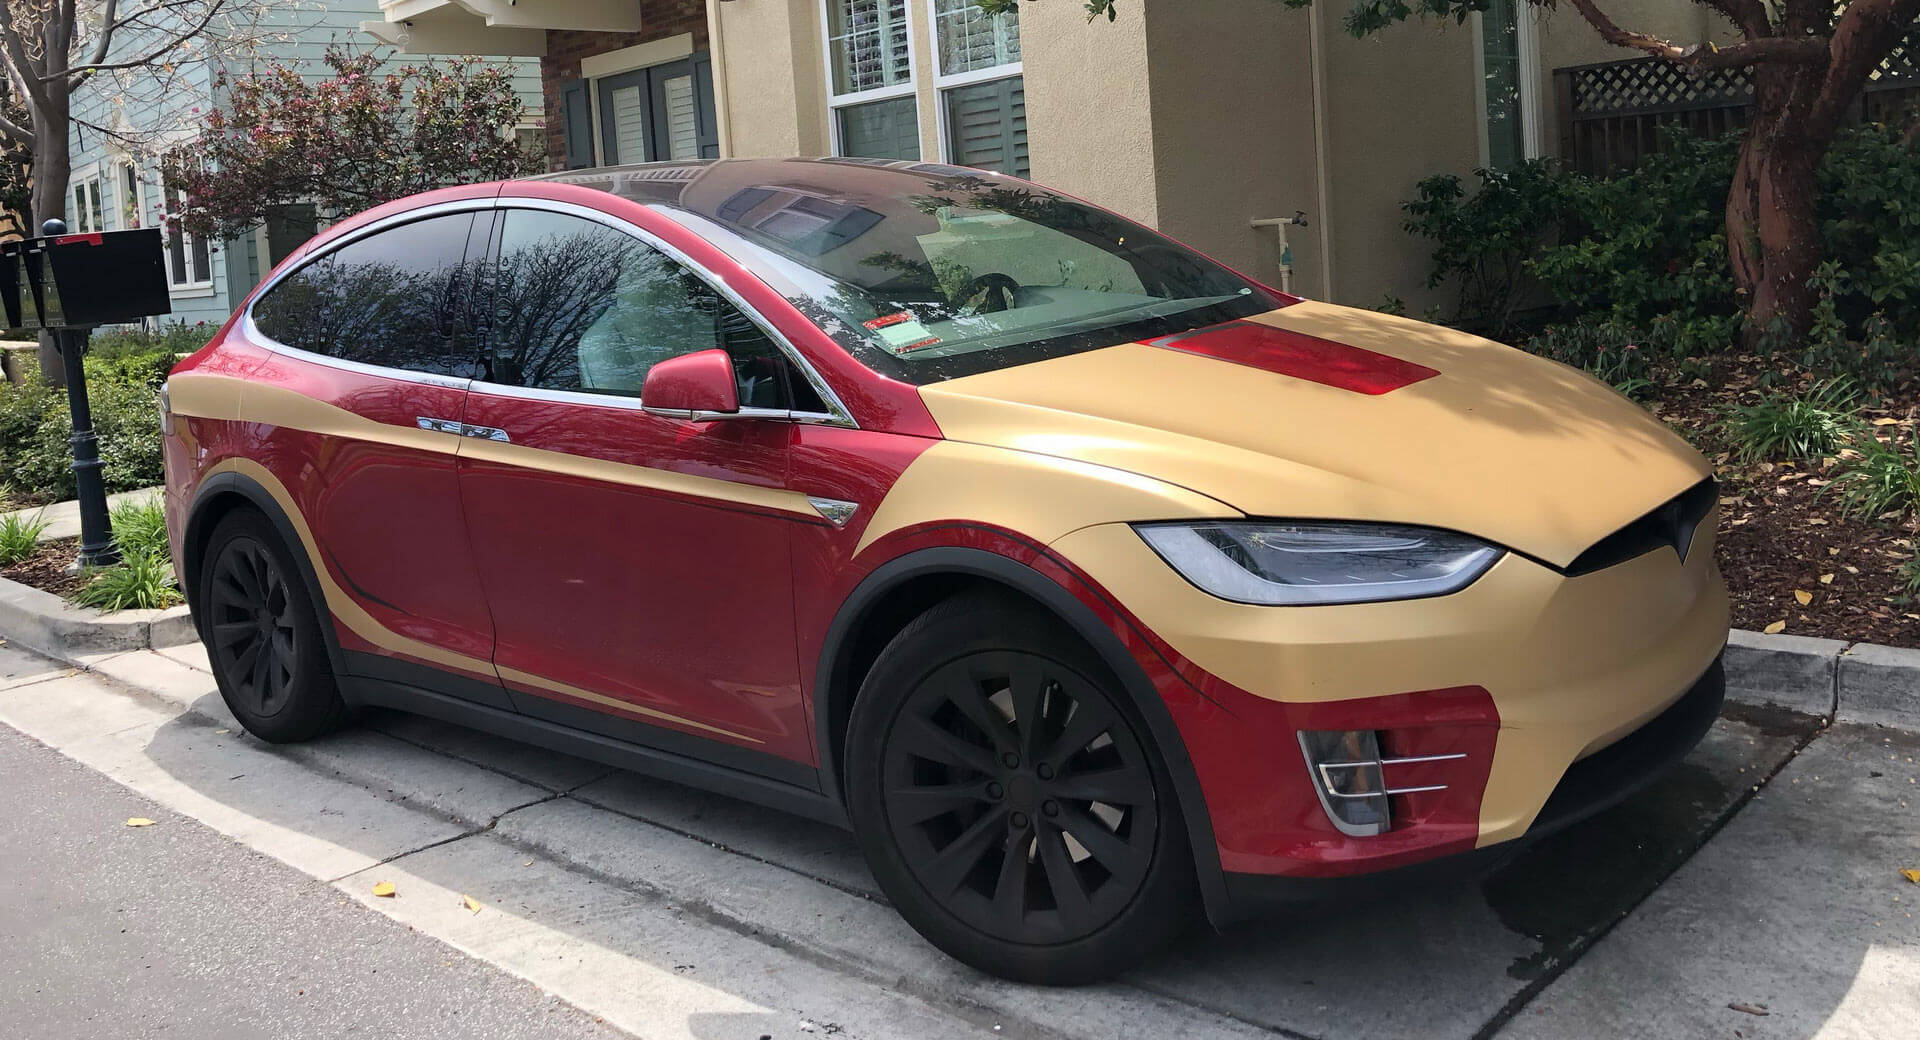 Are Iron Man Teslas A Thing? It Kind Of Seems That Way